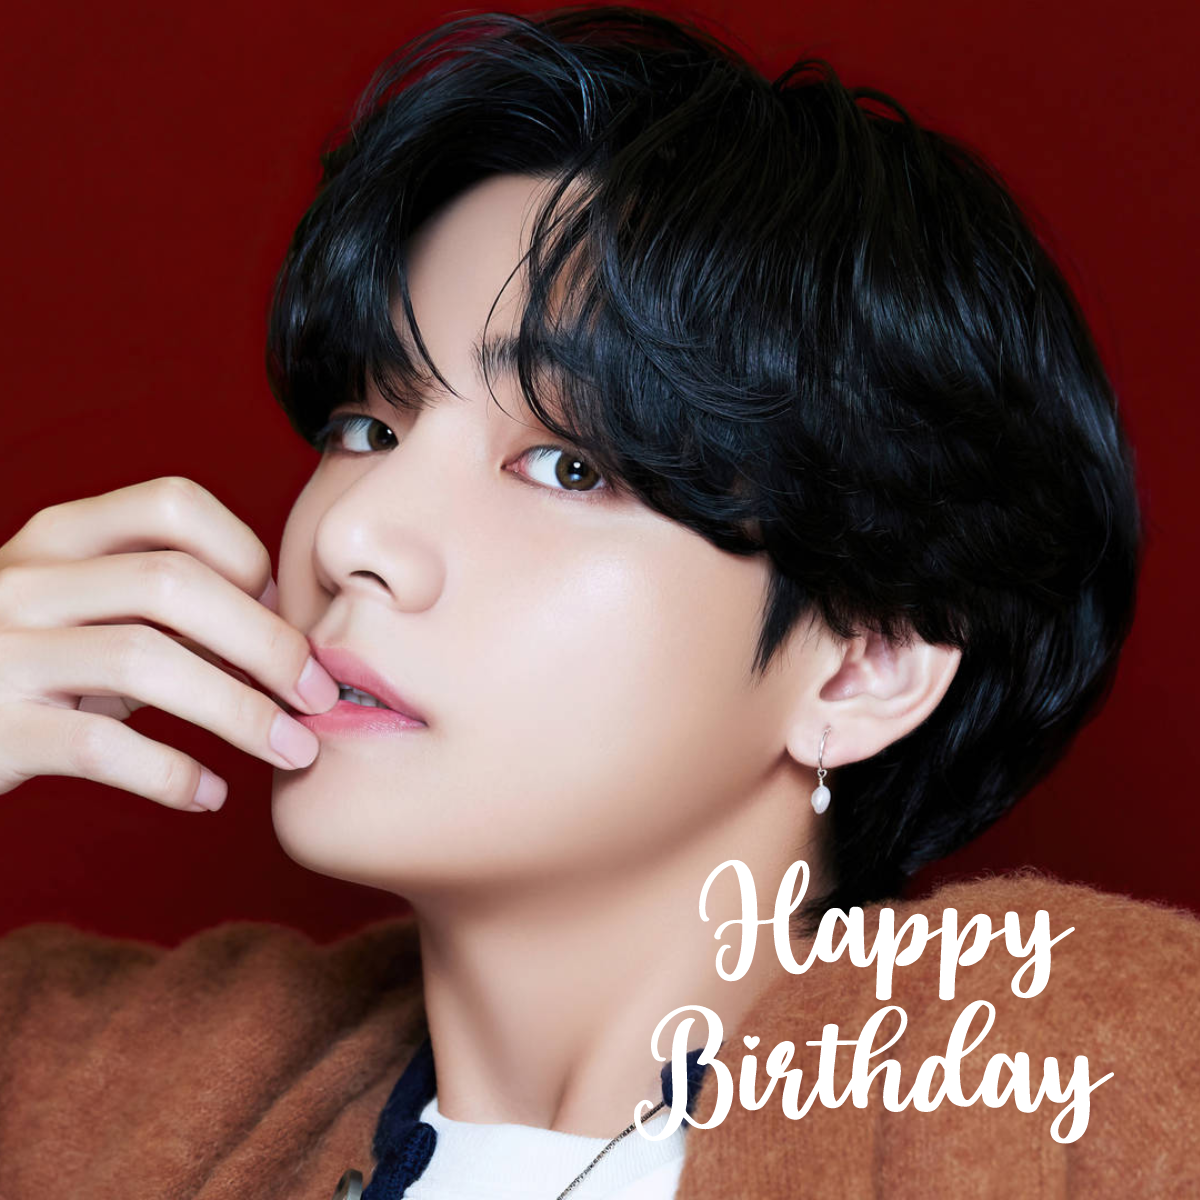 Happy Birthday Kim Taehyung aka V: Wishes, Quotes, Messages, Greetings, Images, and WhatsApp Status Video to Download